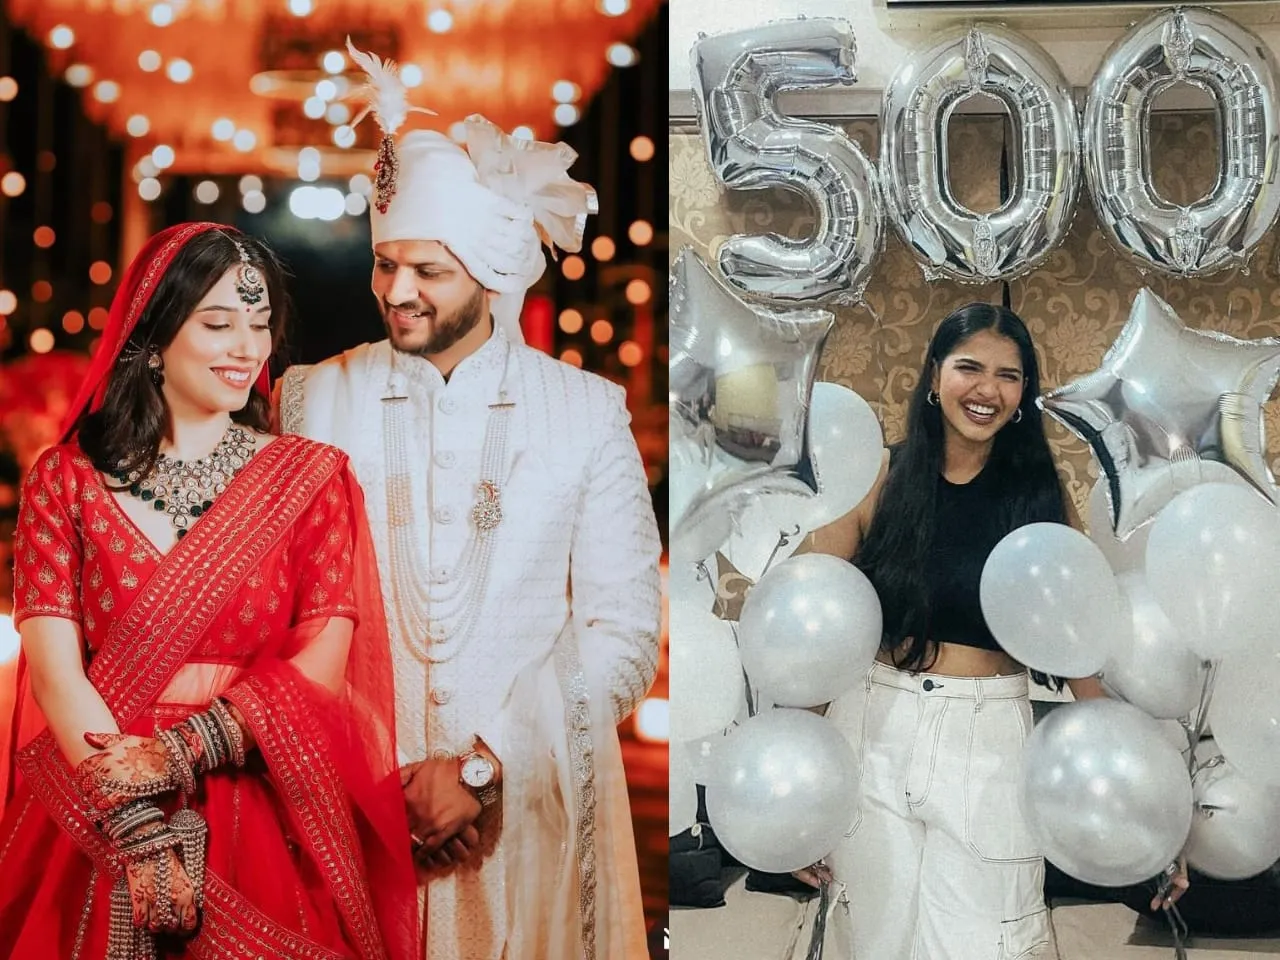 From Saloni Gaur's beautiful wedding to Anushka Sen's cameo in the 'Country of Blind', this creator's roundup has every fun update of the week.